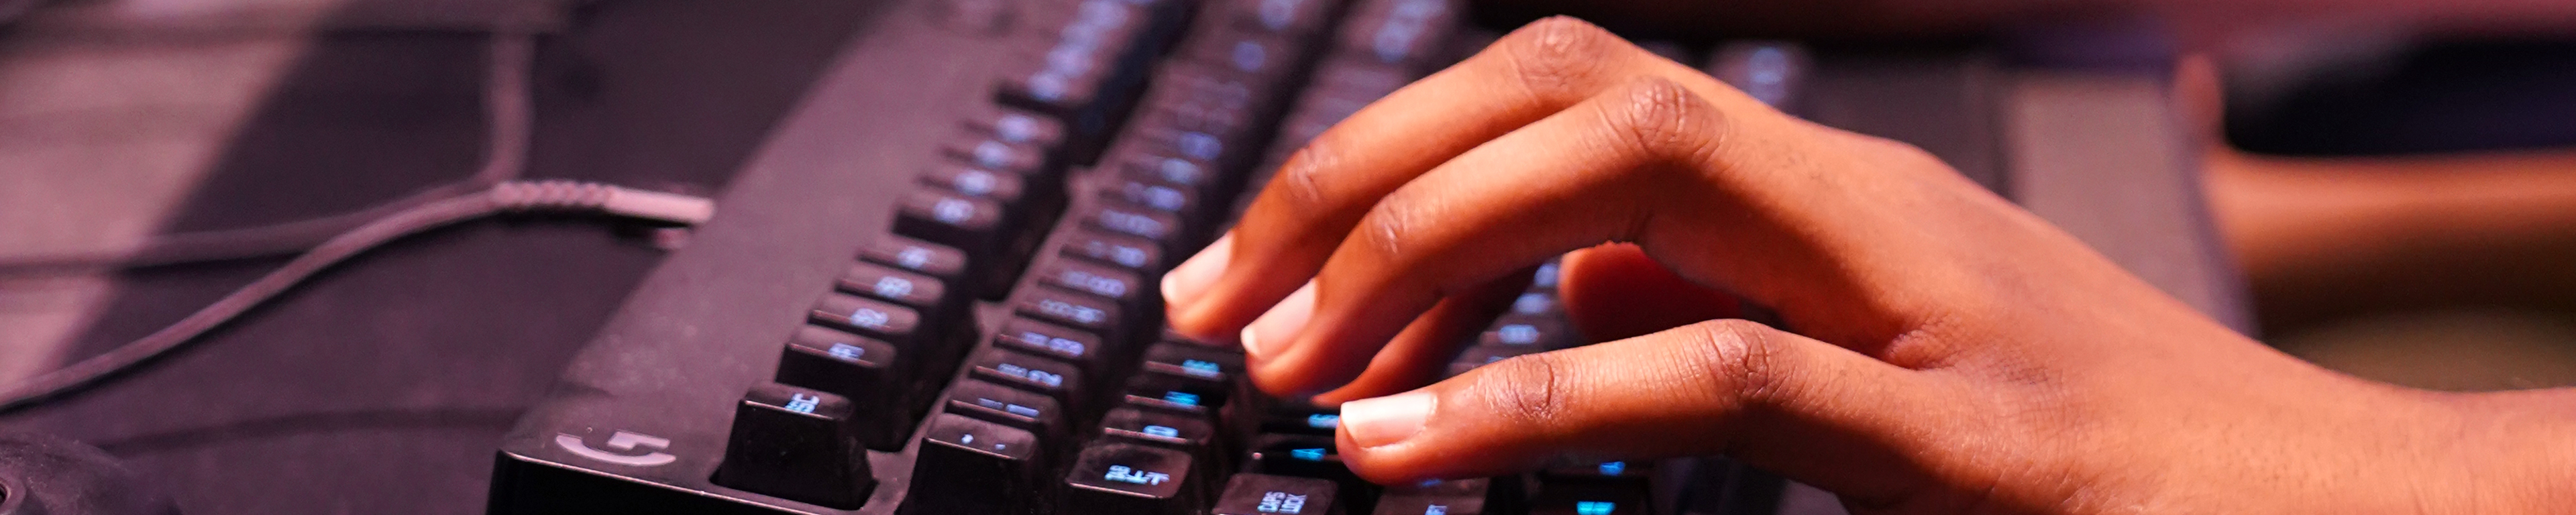 Close up of hand typing on keyboard